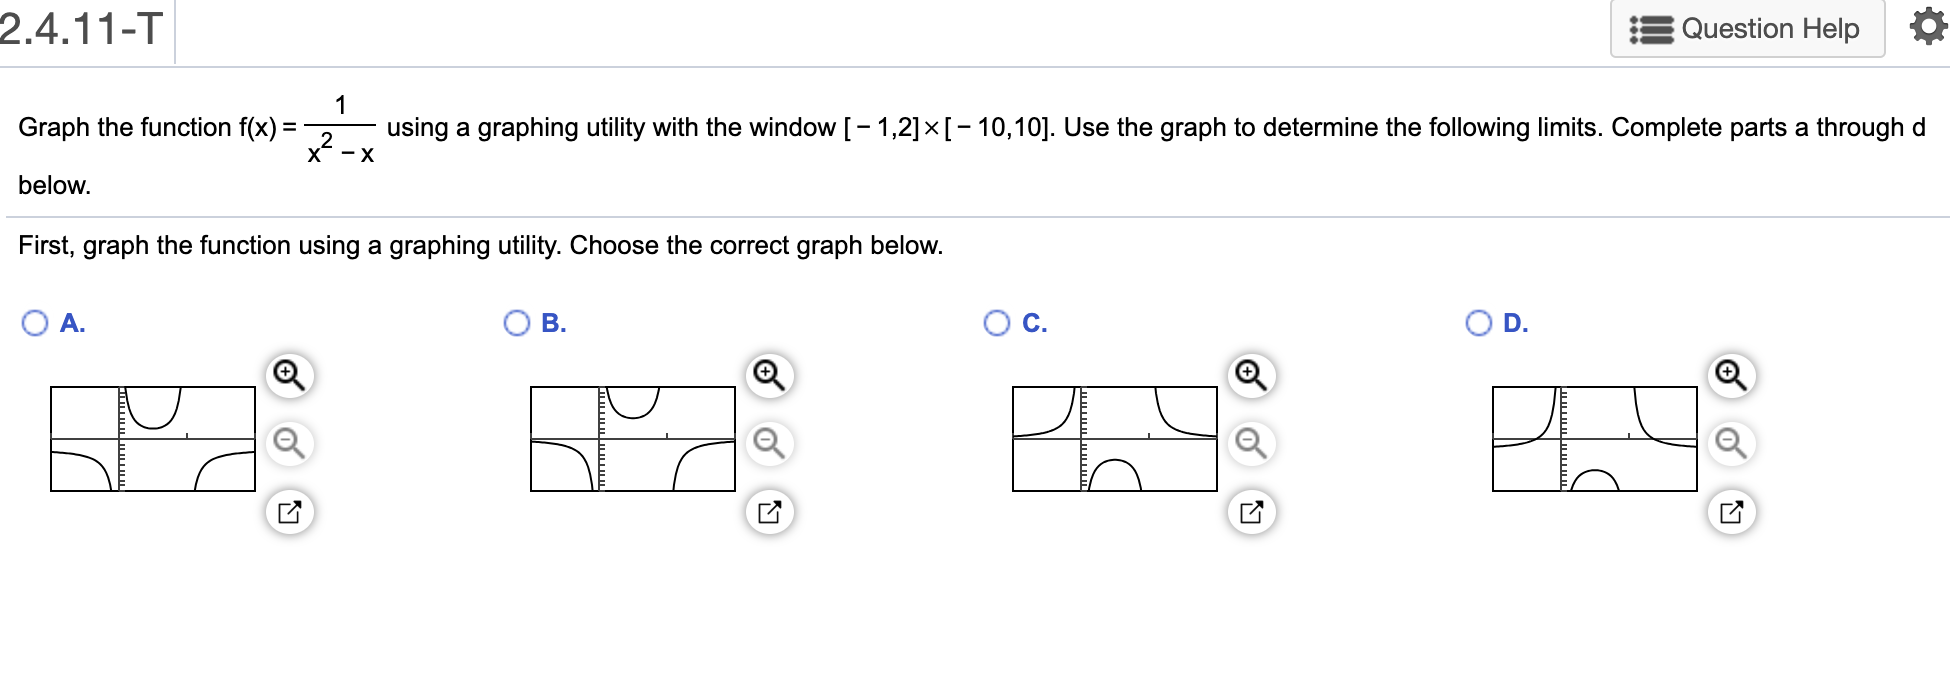 2.4.11-T
Question Help
1
using a graphing utility with the window [- 1,2]×[- 10,10]. Use the graph to determine the following limits. Complete parts a throughd
х —х
Graph the function f(x):
%3D
below.
First, graph the function using a graphing utility. Choose the correct graph below.
OD.
O A.
B.
C.
